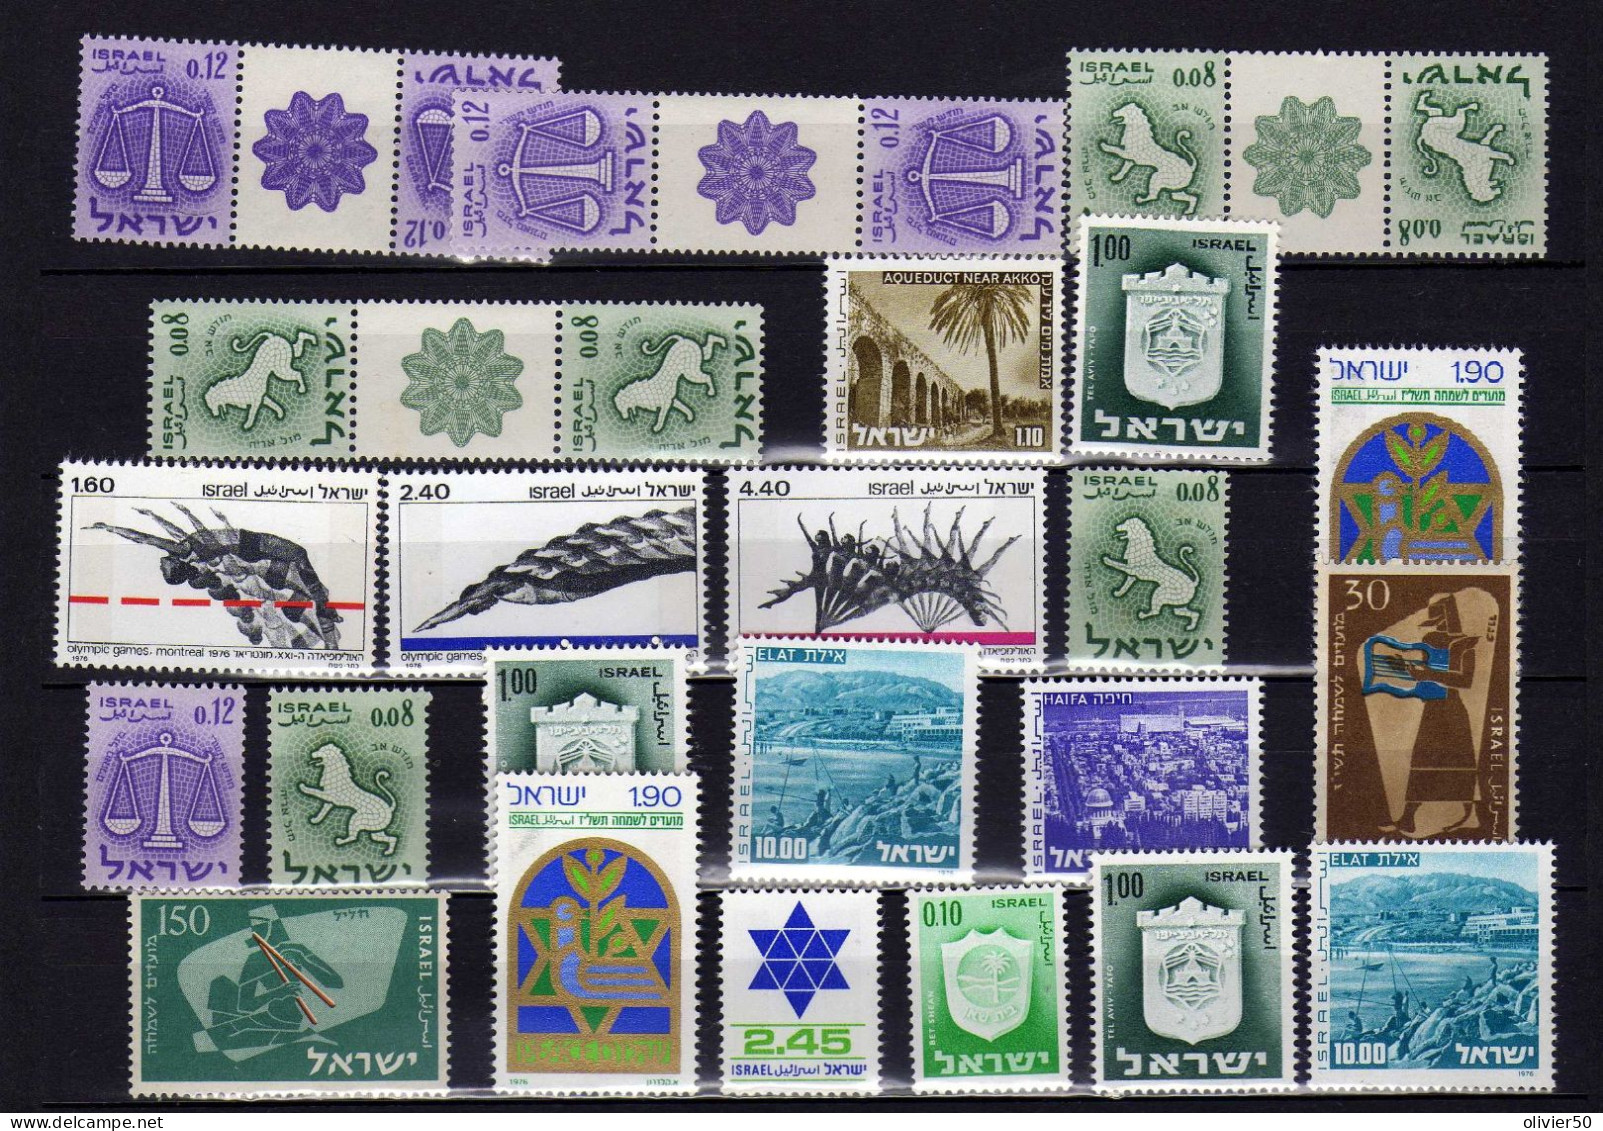 Israel - Mosaiques  - Jeux Olympiques - Sites _ Neufs** - MNH - Nuevos (sin Tab)